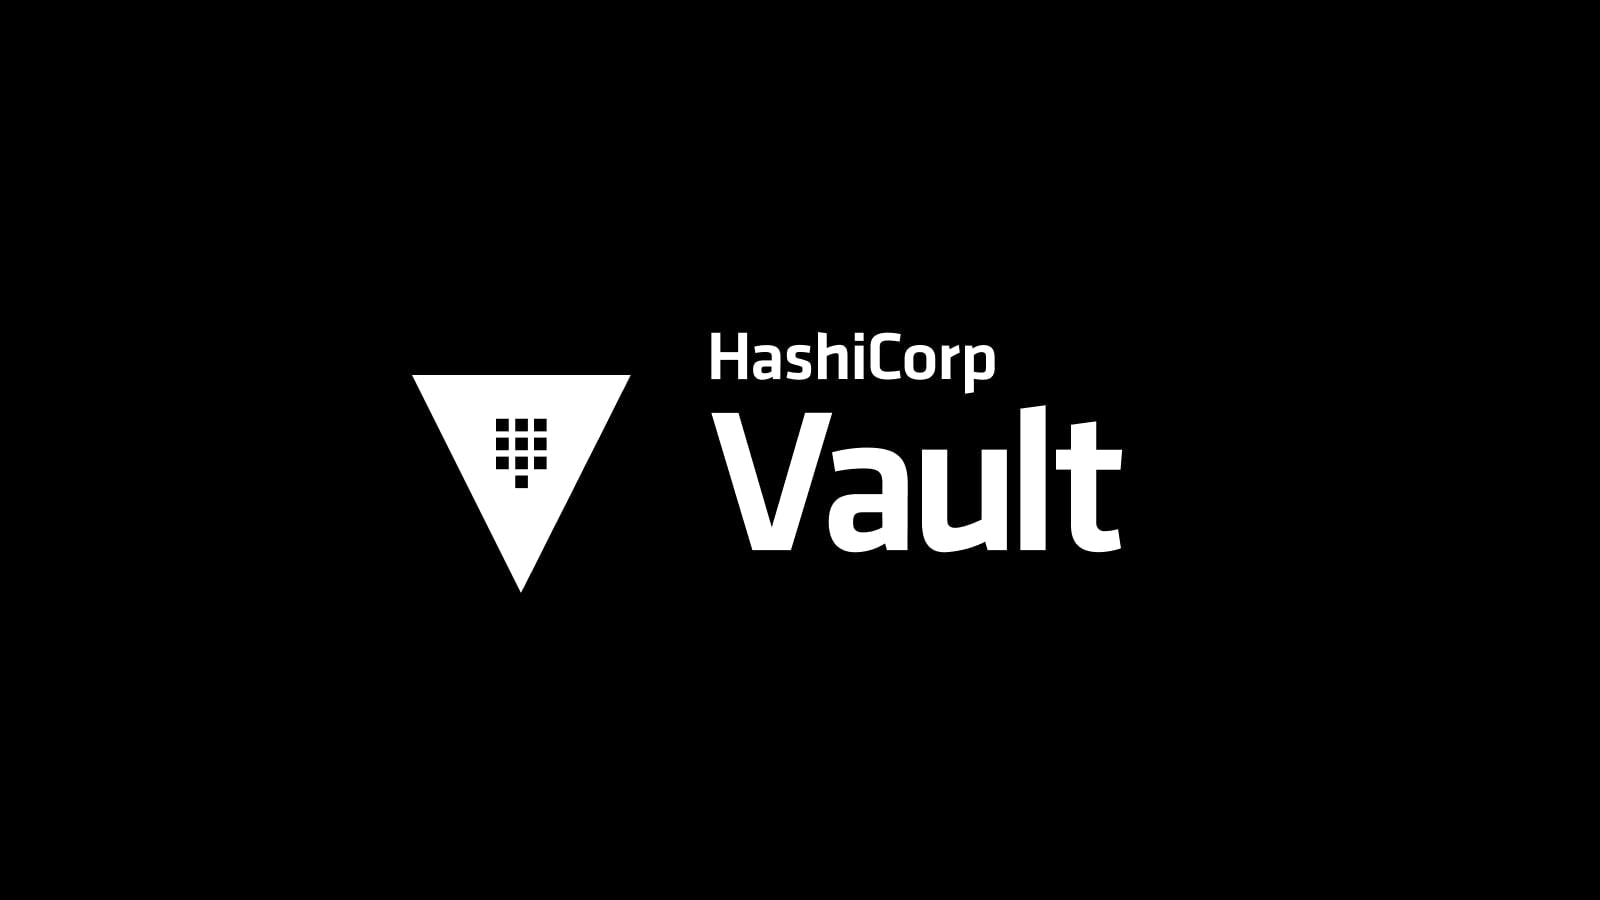 Vault client libraries for Go and .NET are now in public beta